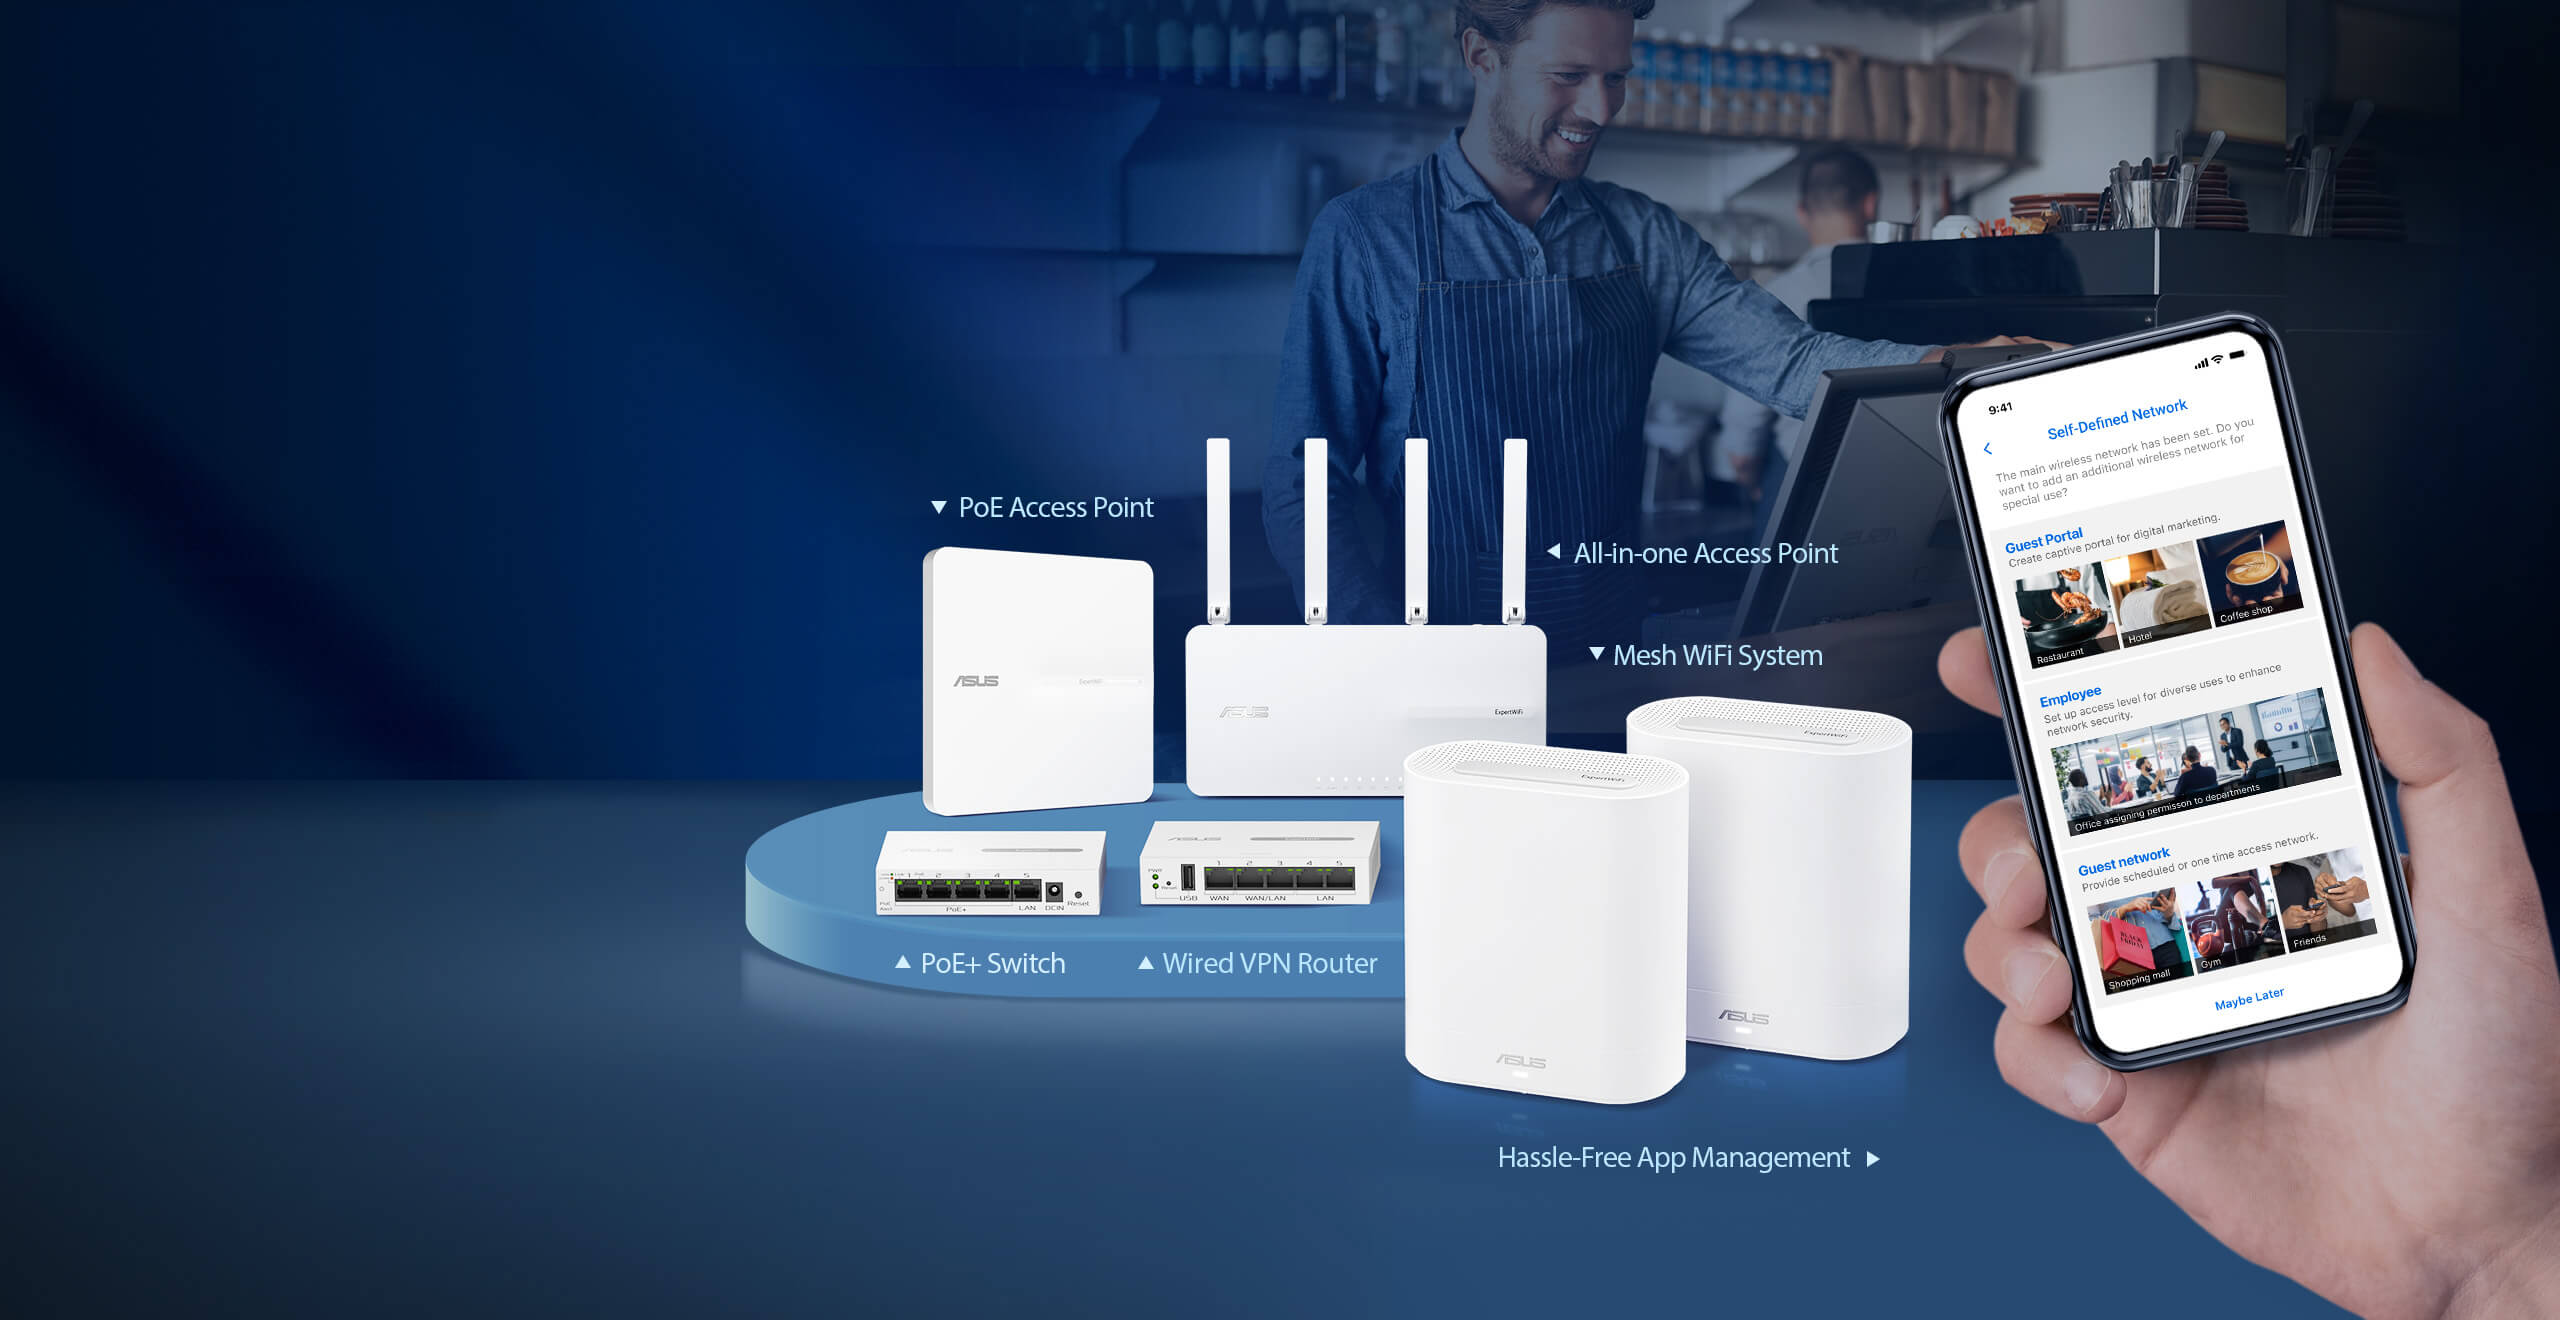 The ExpertWiFi product lineup in a café setting, with a hand holding a phone showing the ExpertWiFi SDN feature UI. From left to right in the back: EBA63 PoE AP, EBR63 all-in-one AP. Front: EBP15 PoE+ switch, EBG15 wired VPN router, and two packs of EBM68 mesh system.